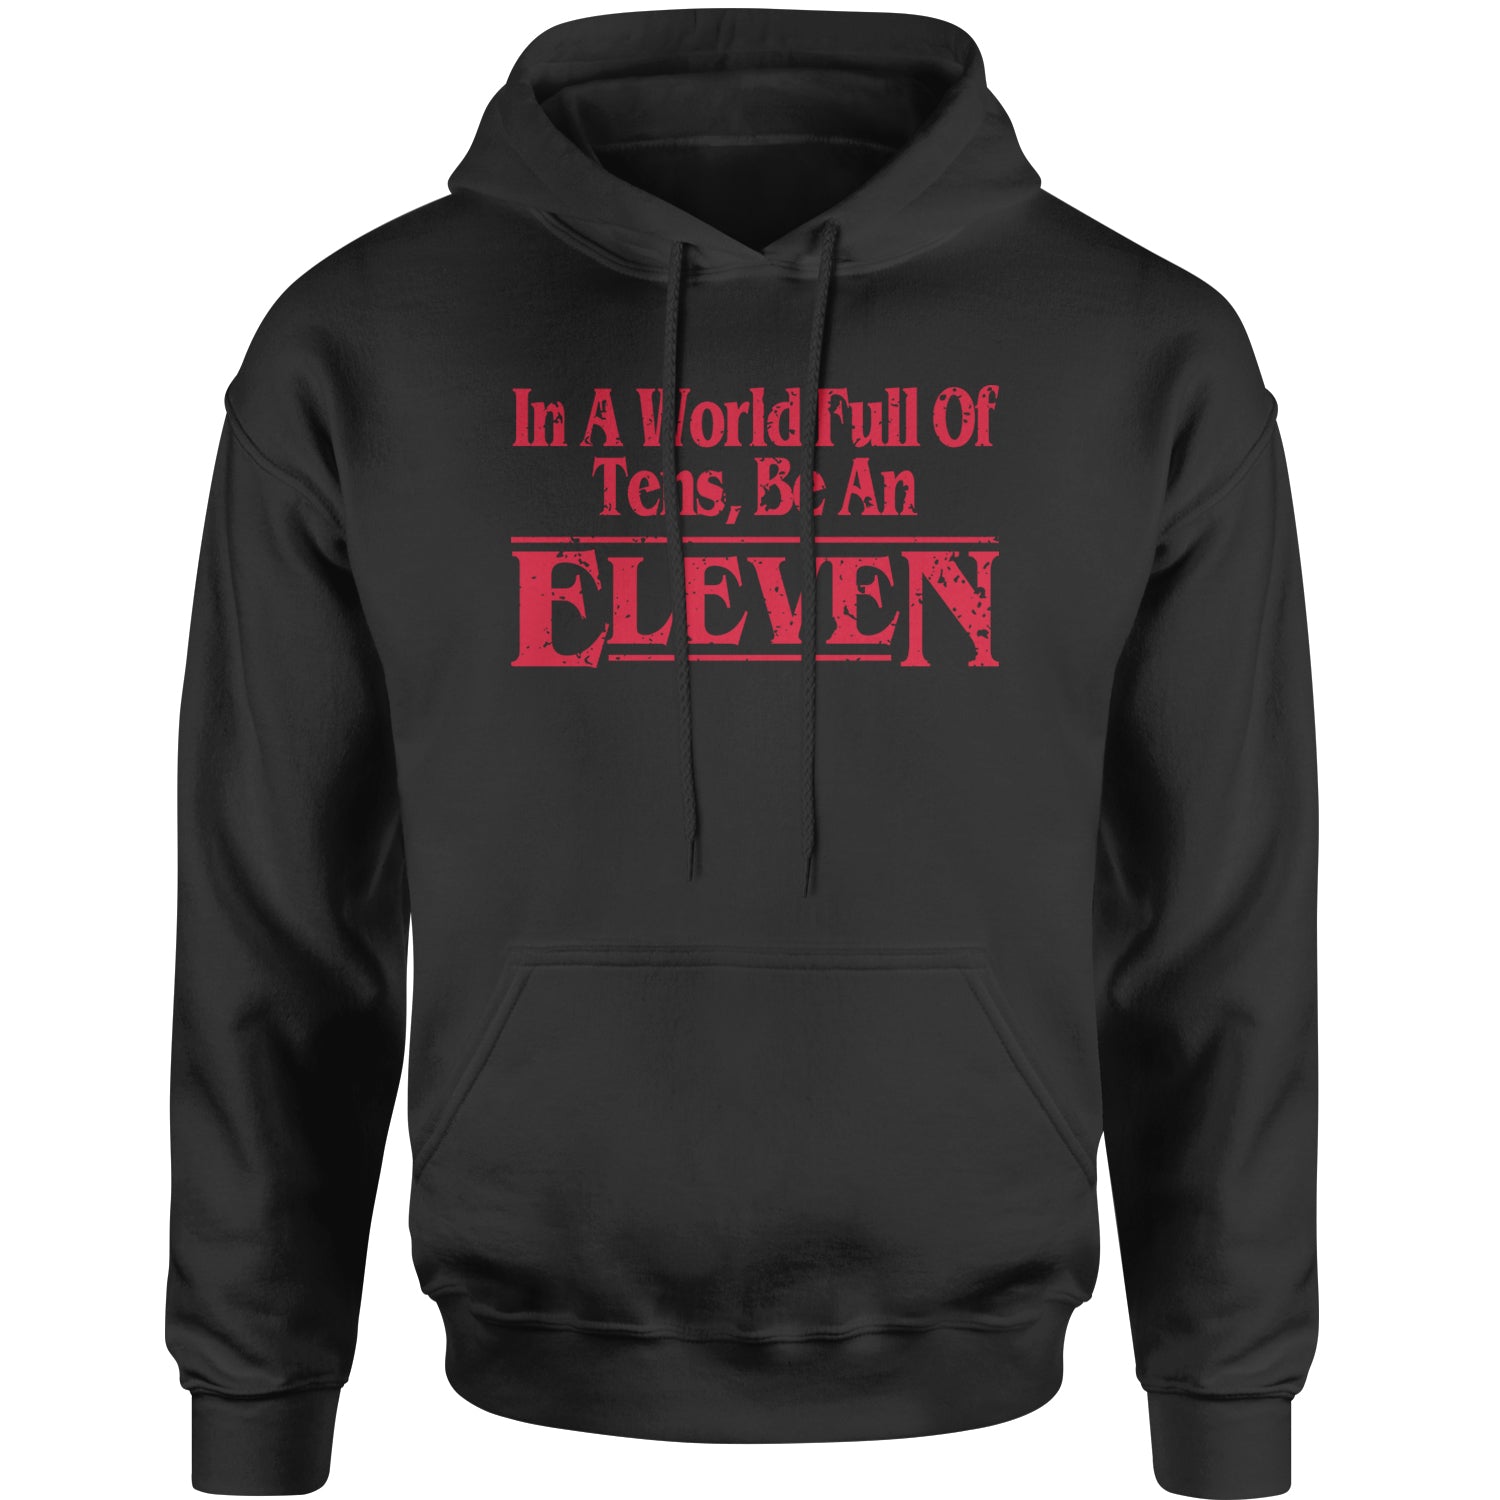 In A World Full Of Tens, Be An Eleven Adult Hoodie Sweatshirt